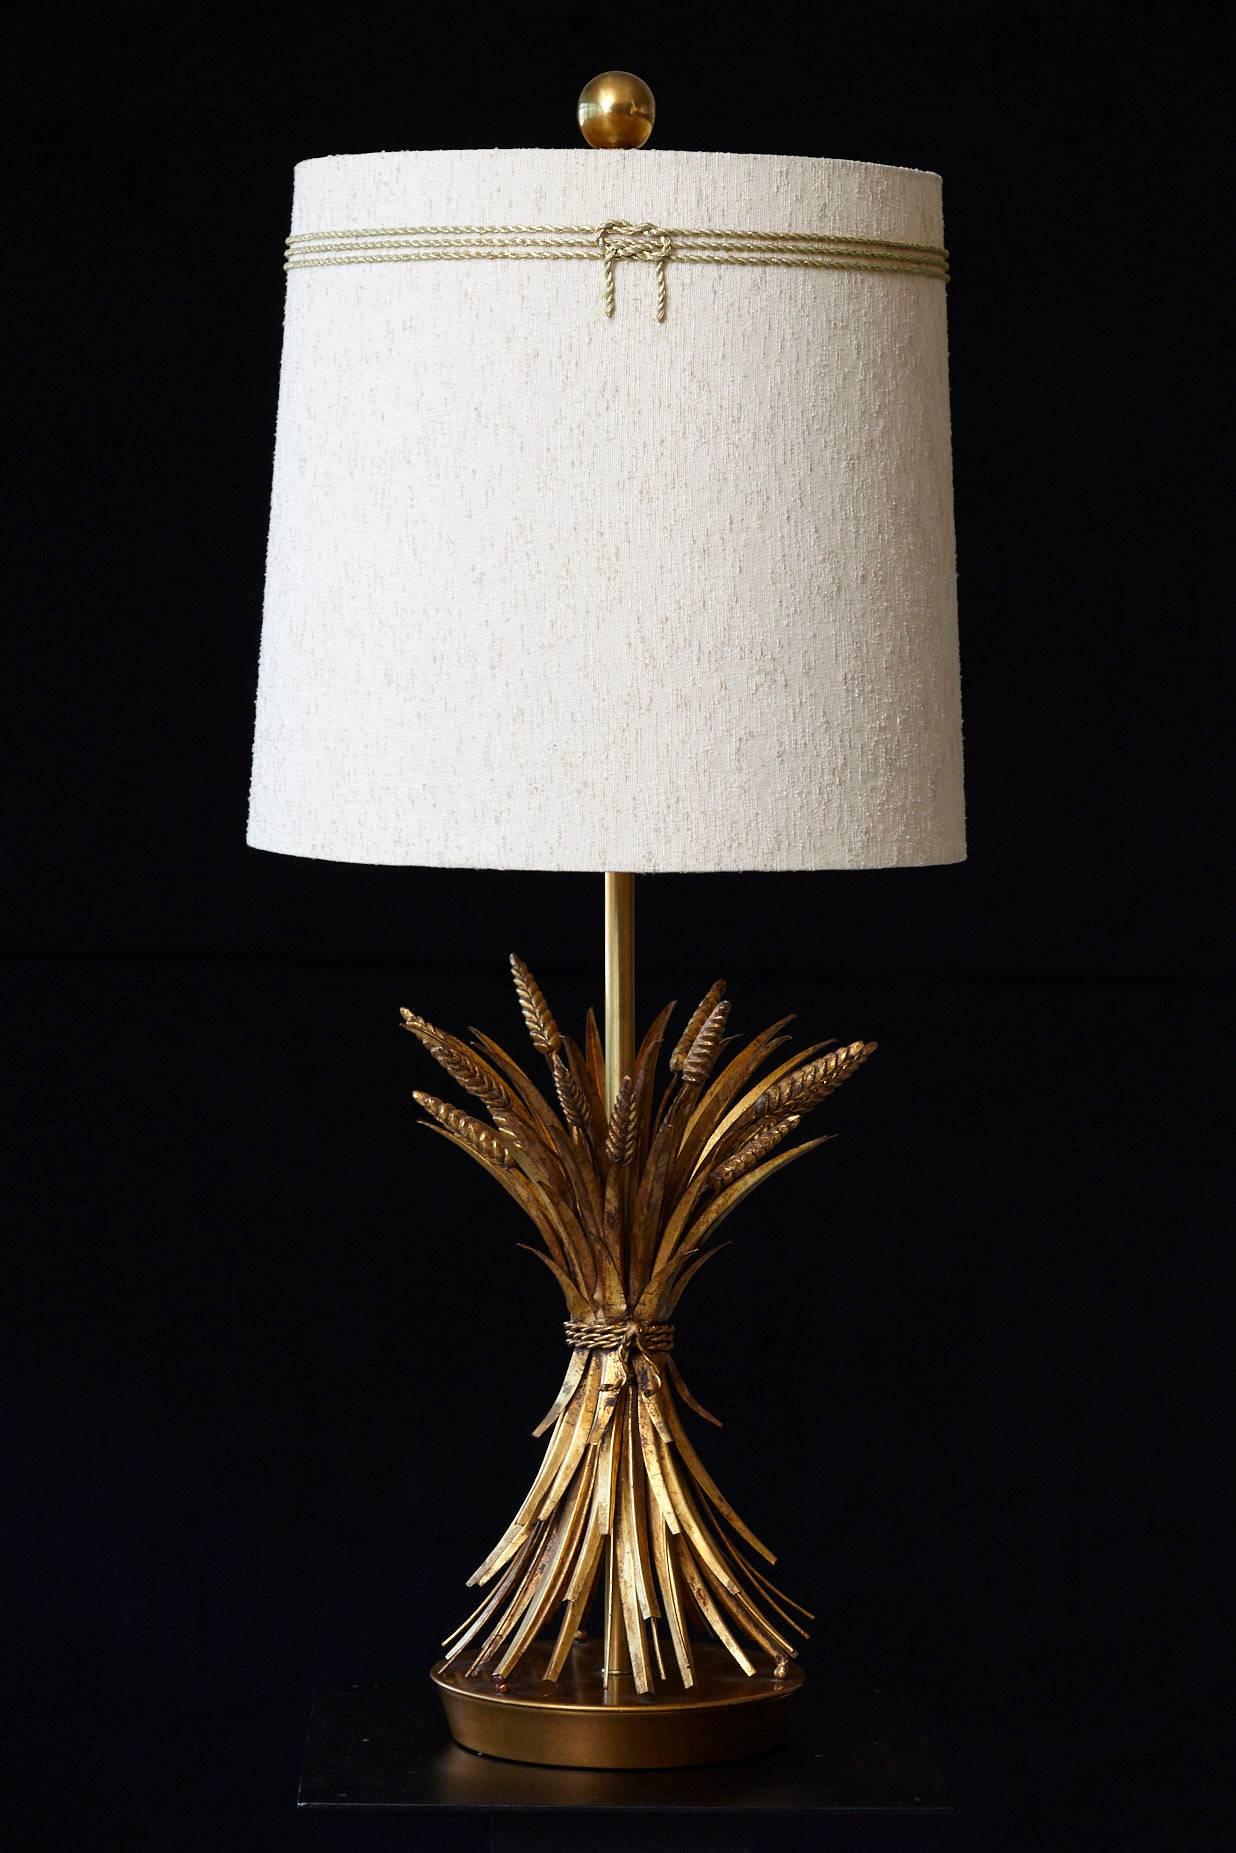 Impressive sheaf of wheat gilt metal table lamp by Marbro. The lamp has a brushed brass base and gilt tole metal wheat sheafs. 
We have a second wheat sheaf table lamp available by the same manufacturer, the same model, which is slightly different